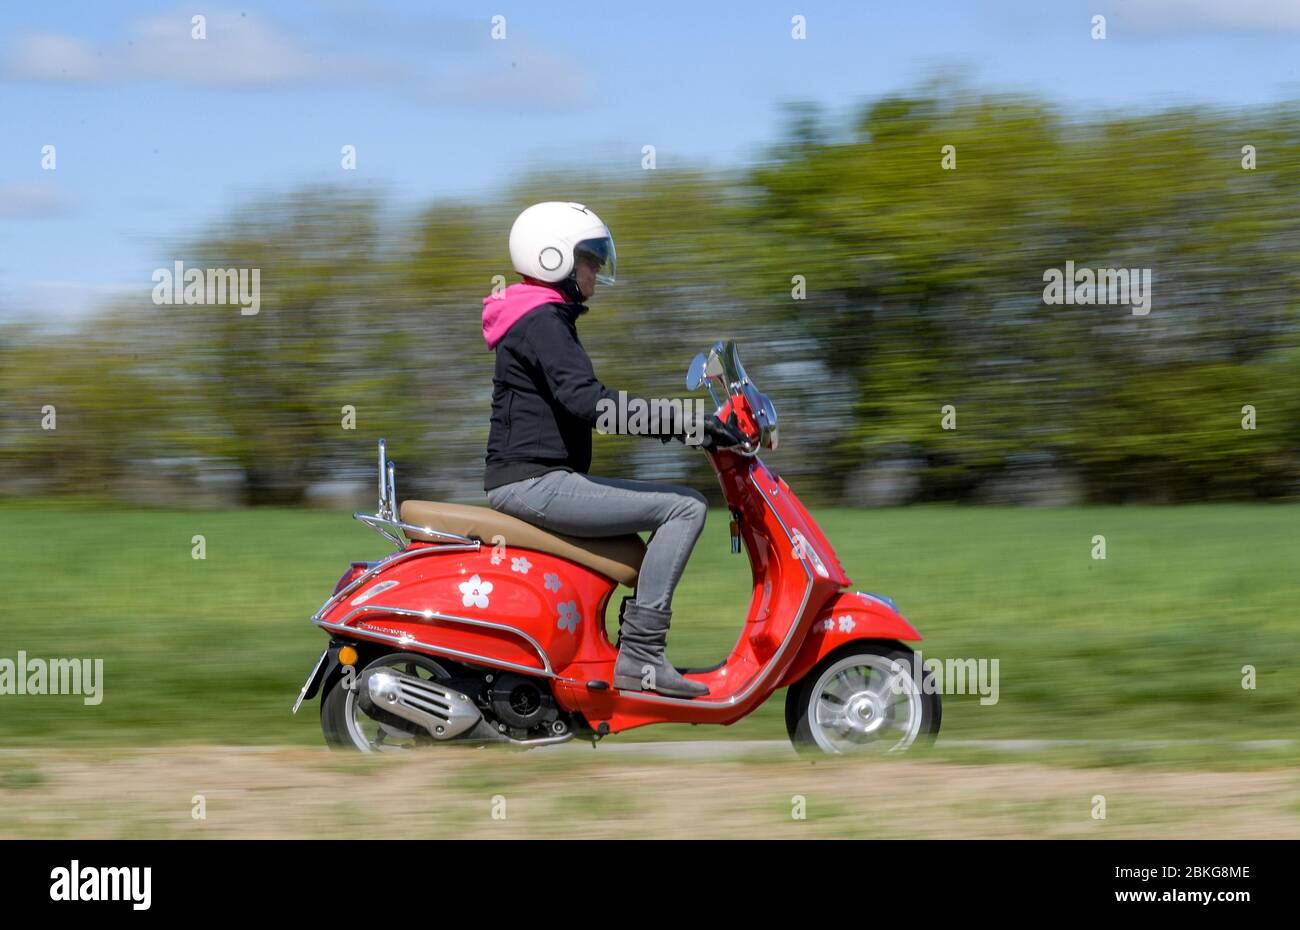 Kiel, Germany. 04th May, 2020. In sunny weather, a woman rides her red 125  cc Vespa scooter along a dirt road wearing safety clothing, helmet and  gloves. Since 01.01.2020, holders of a